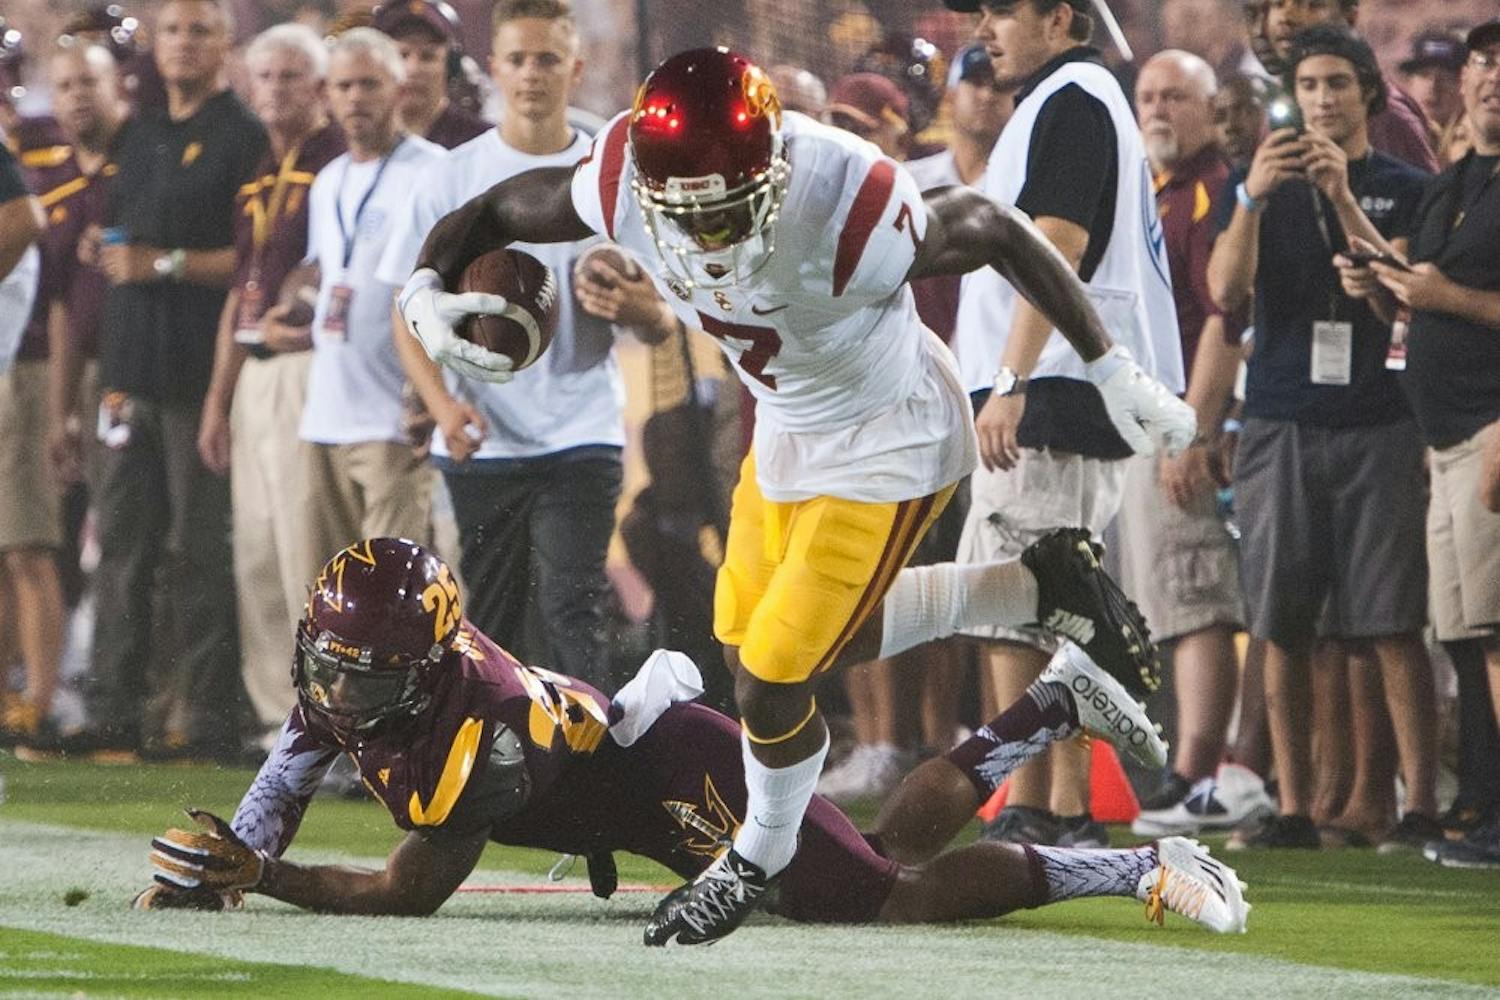 Wide receiver Stephen Mitchell Jr. (7) is forced out of bounds by defensive back Kareem Orr (25) after completing a pass from quarterback Cody Kessler for the University of Southern California first down on Saturday, Sept. 26, 2015, at Sun Devil Stadium in Tempe.